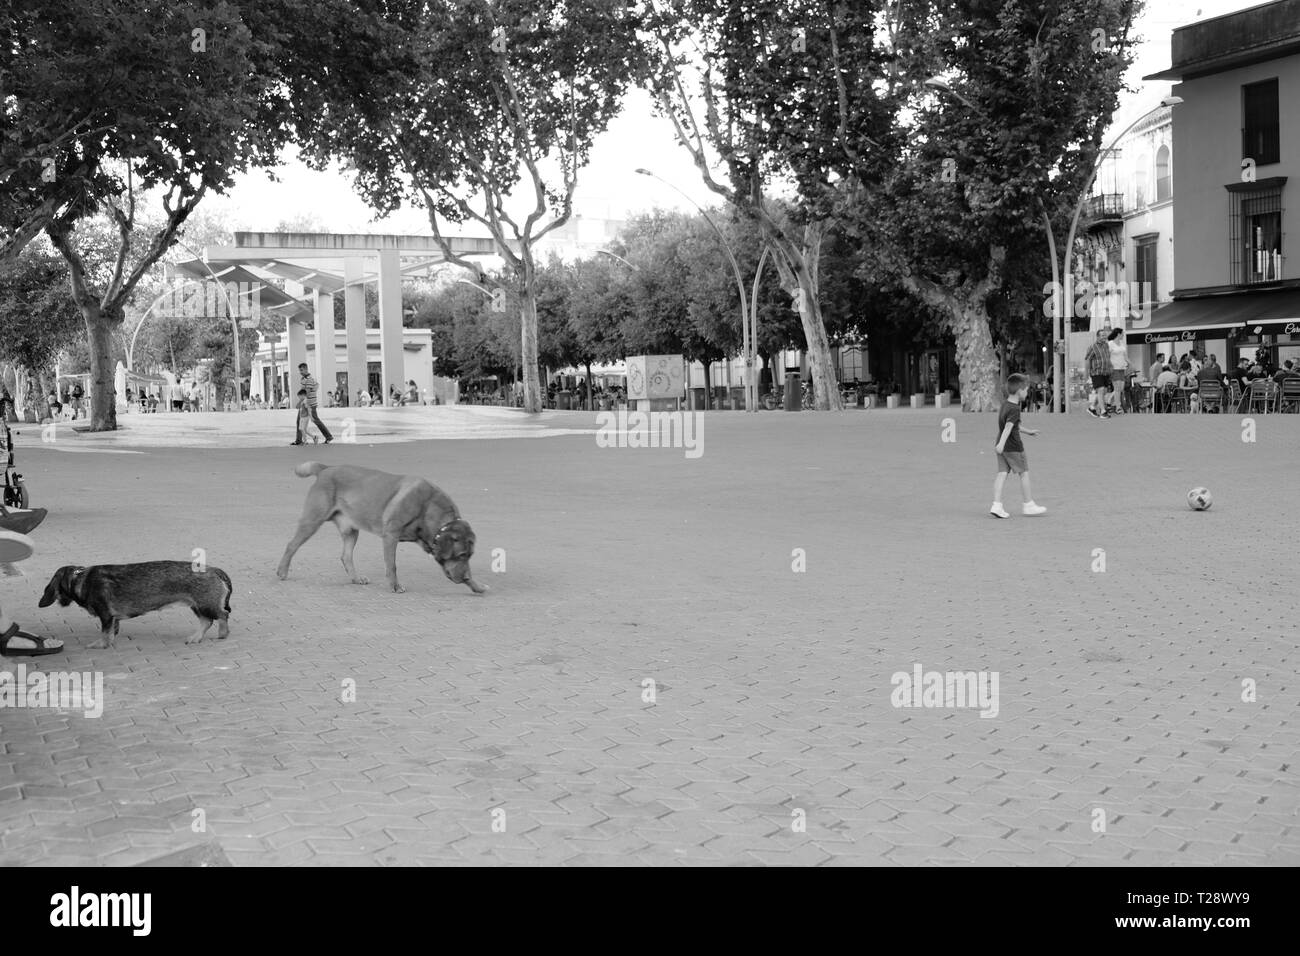 Dogs and children playing on the street Stock Photo